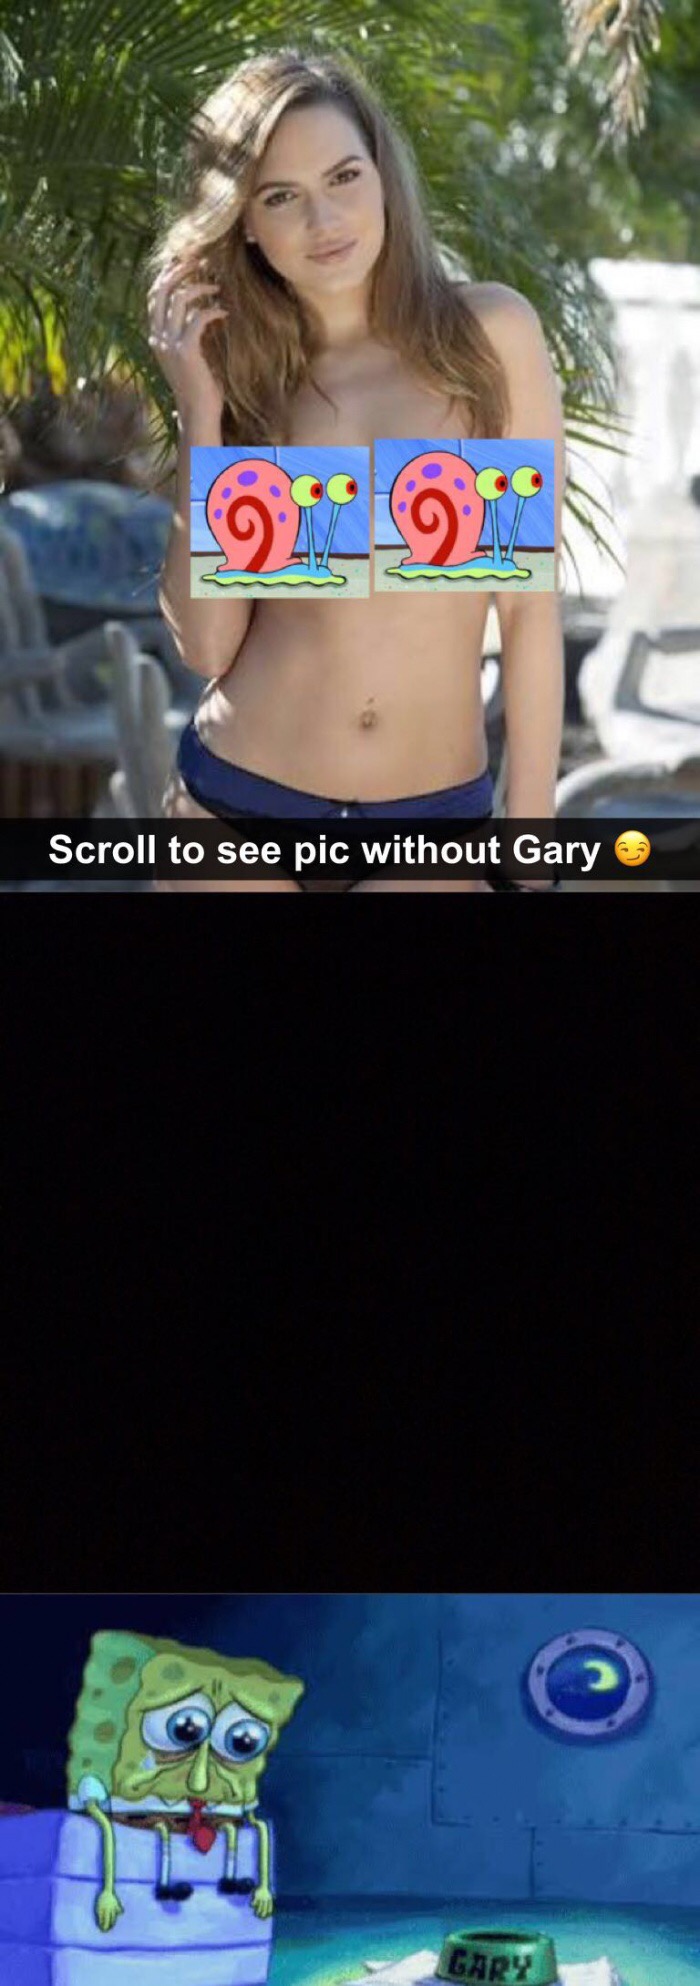 dank meme swipe to see a pic without gary - 1914914 Scroll to see pic without Gary Gary